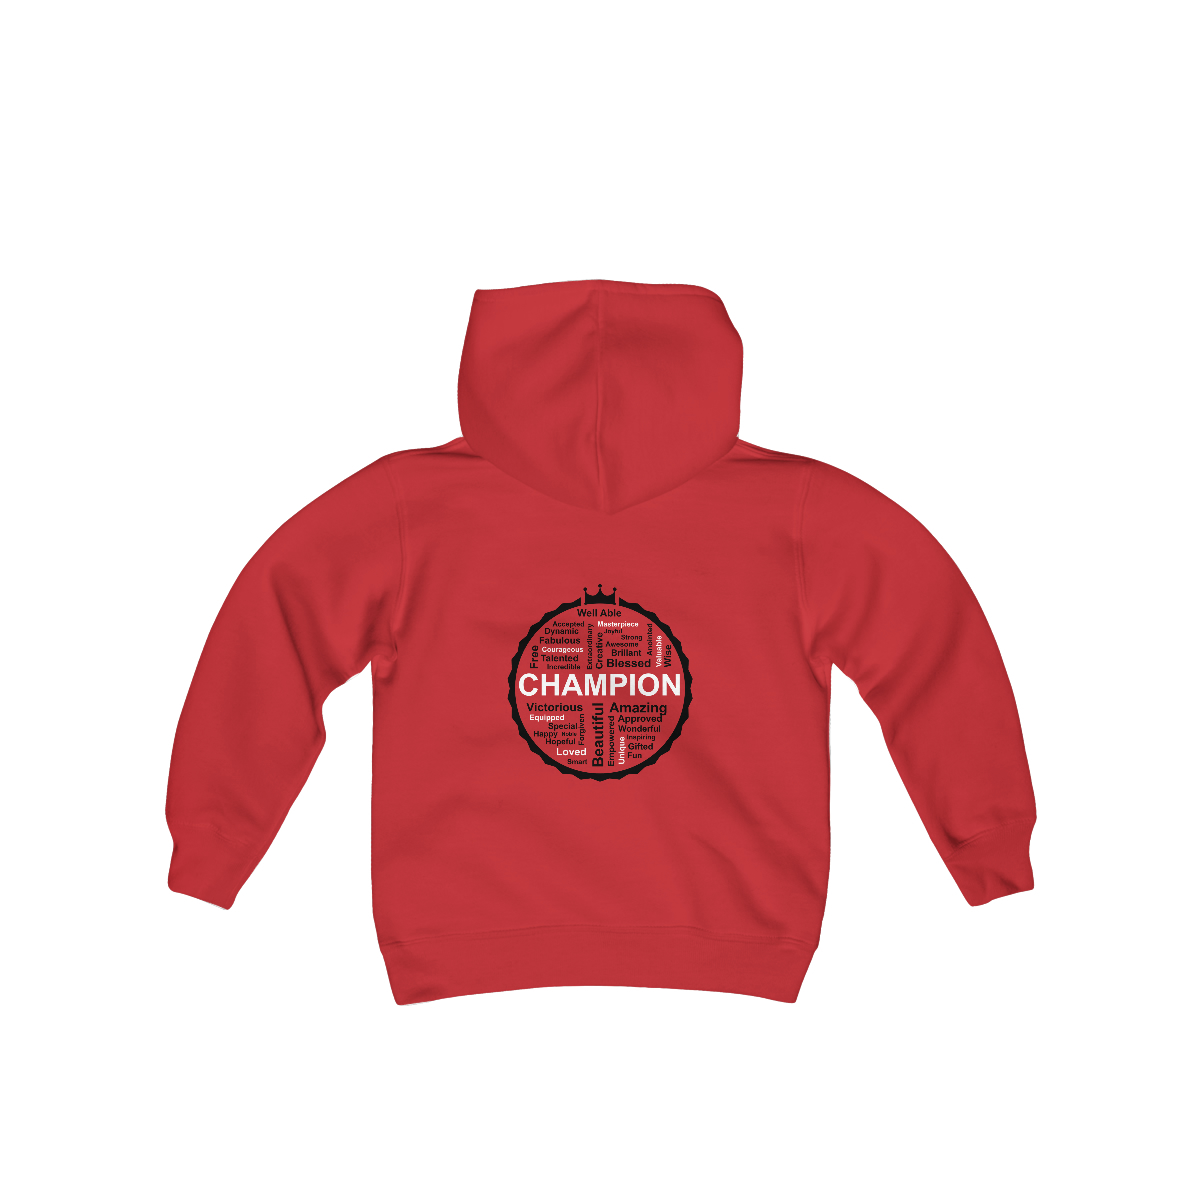 CHAMPION Kids Hoodie - Ministry Special Needs Club Champions